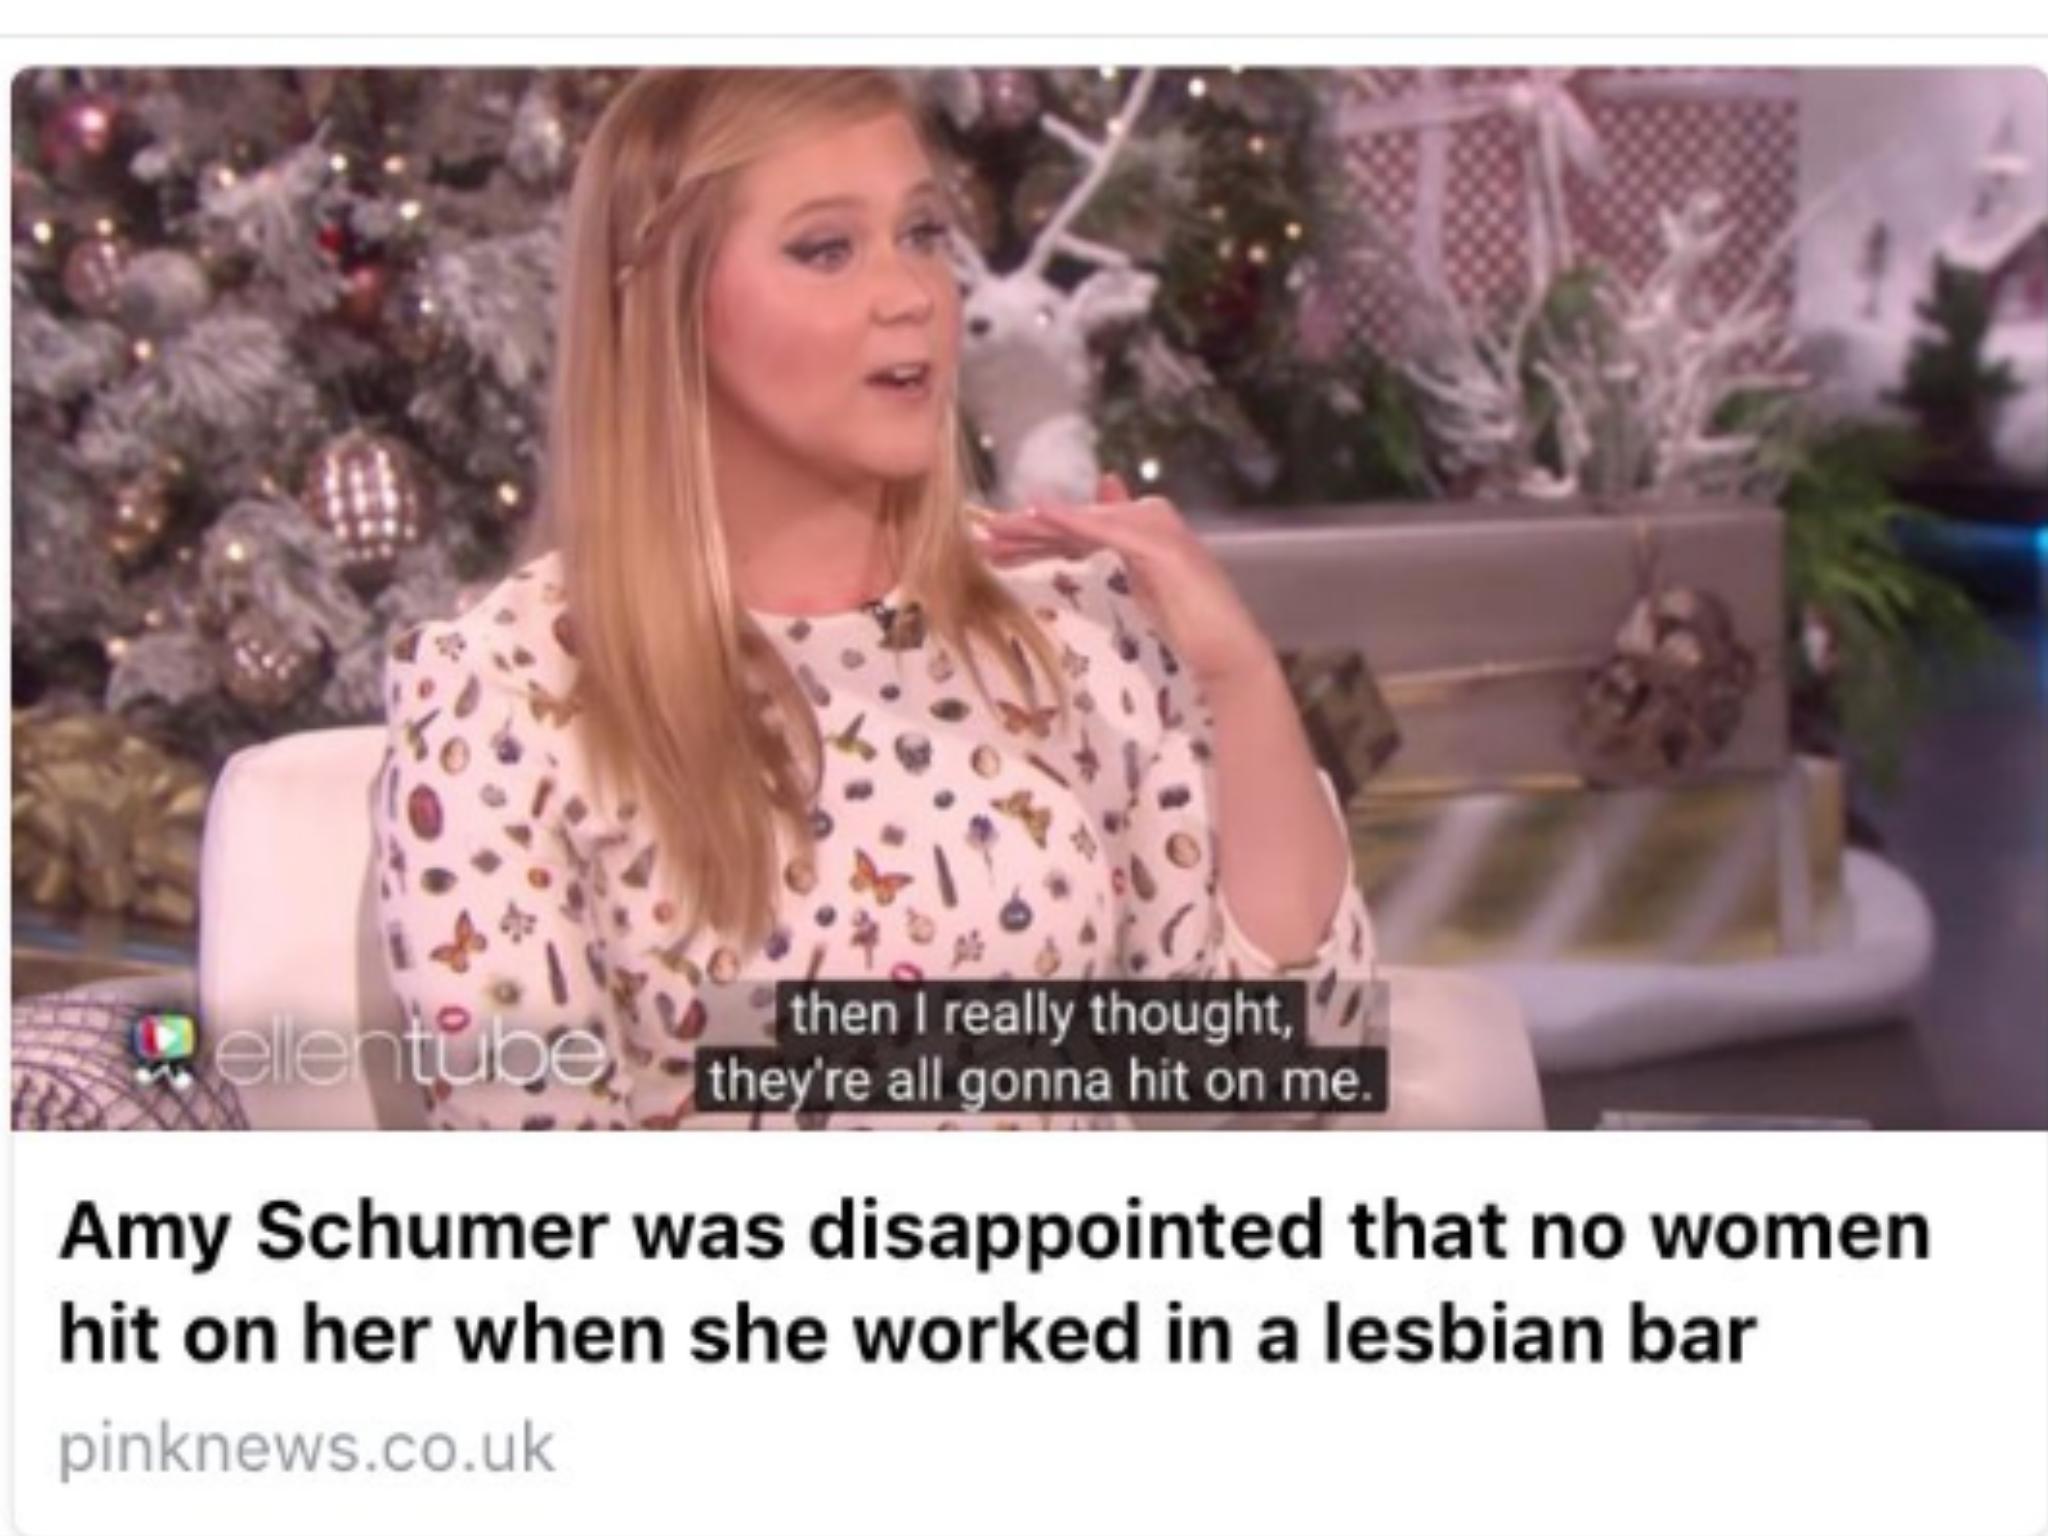 lesbian period meme - then I really thought, ele tude, they're all gonna hit on me. Amy Schumer was disappointed that no women hit on her when she worked in a lesbian bar pinknews.co.uk